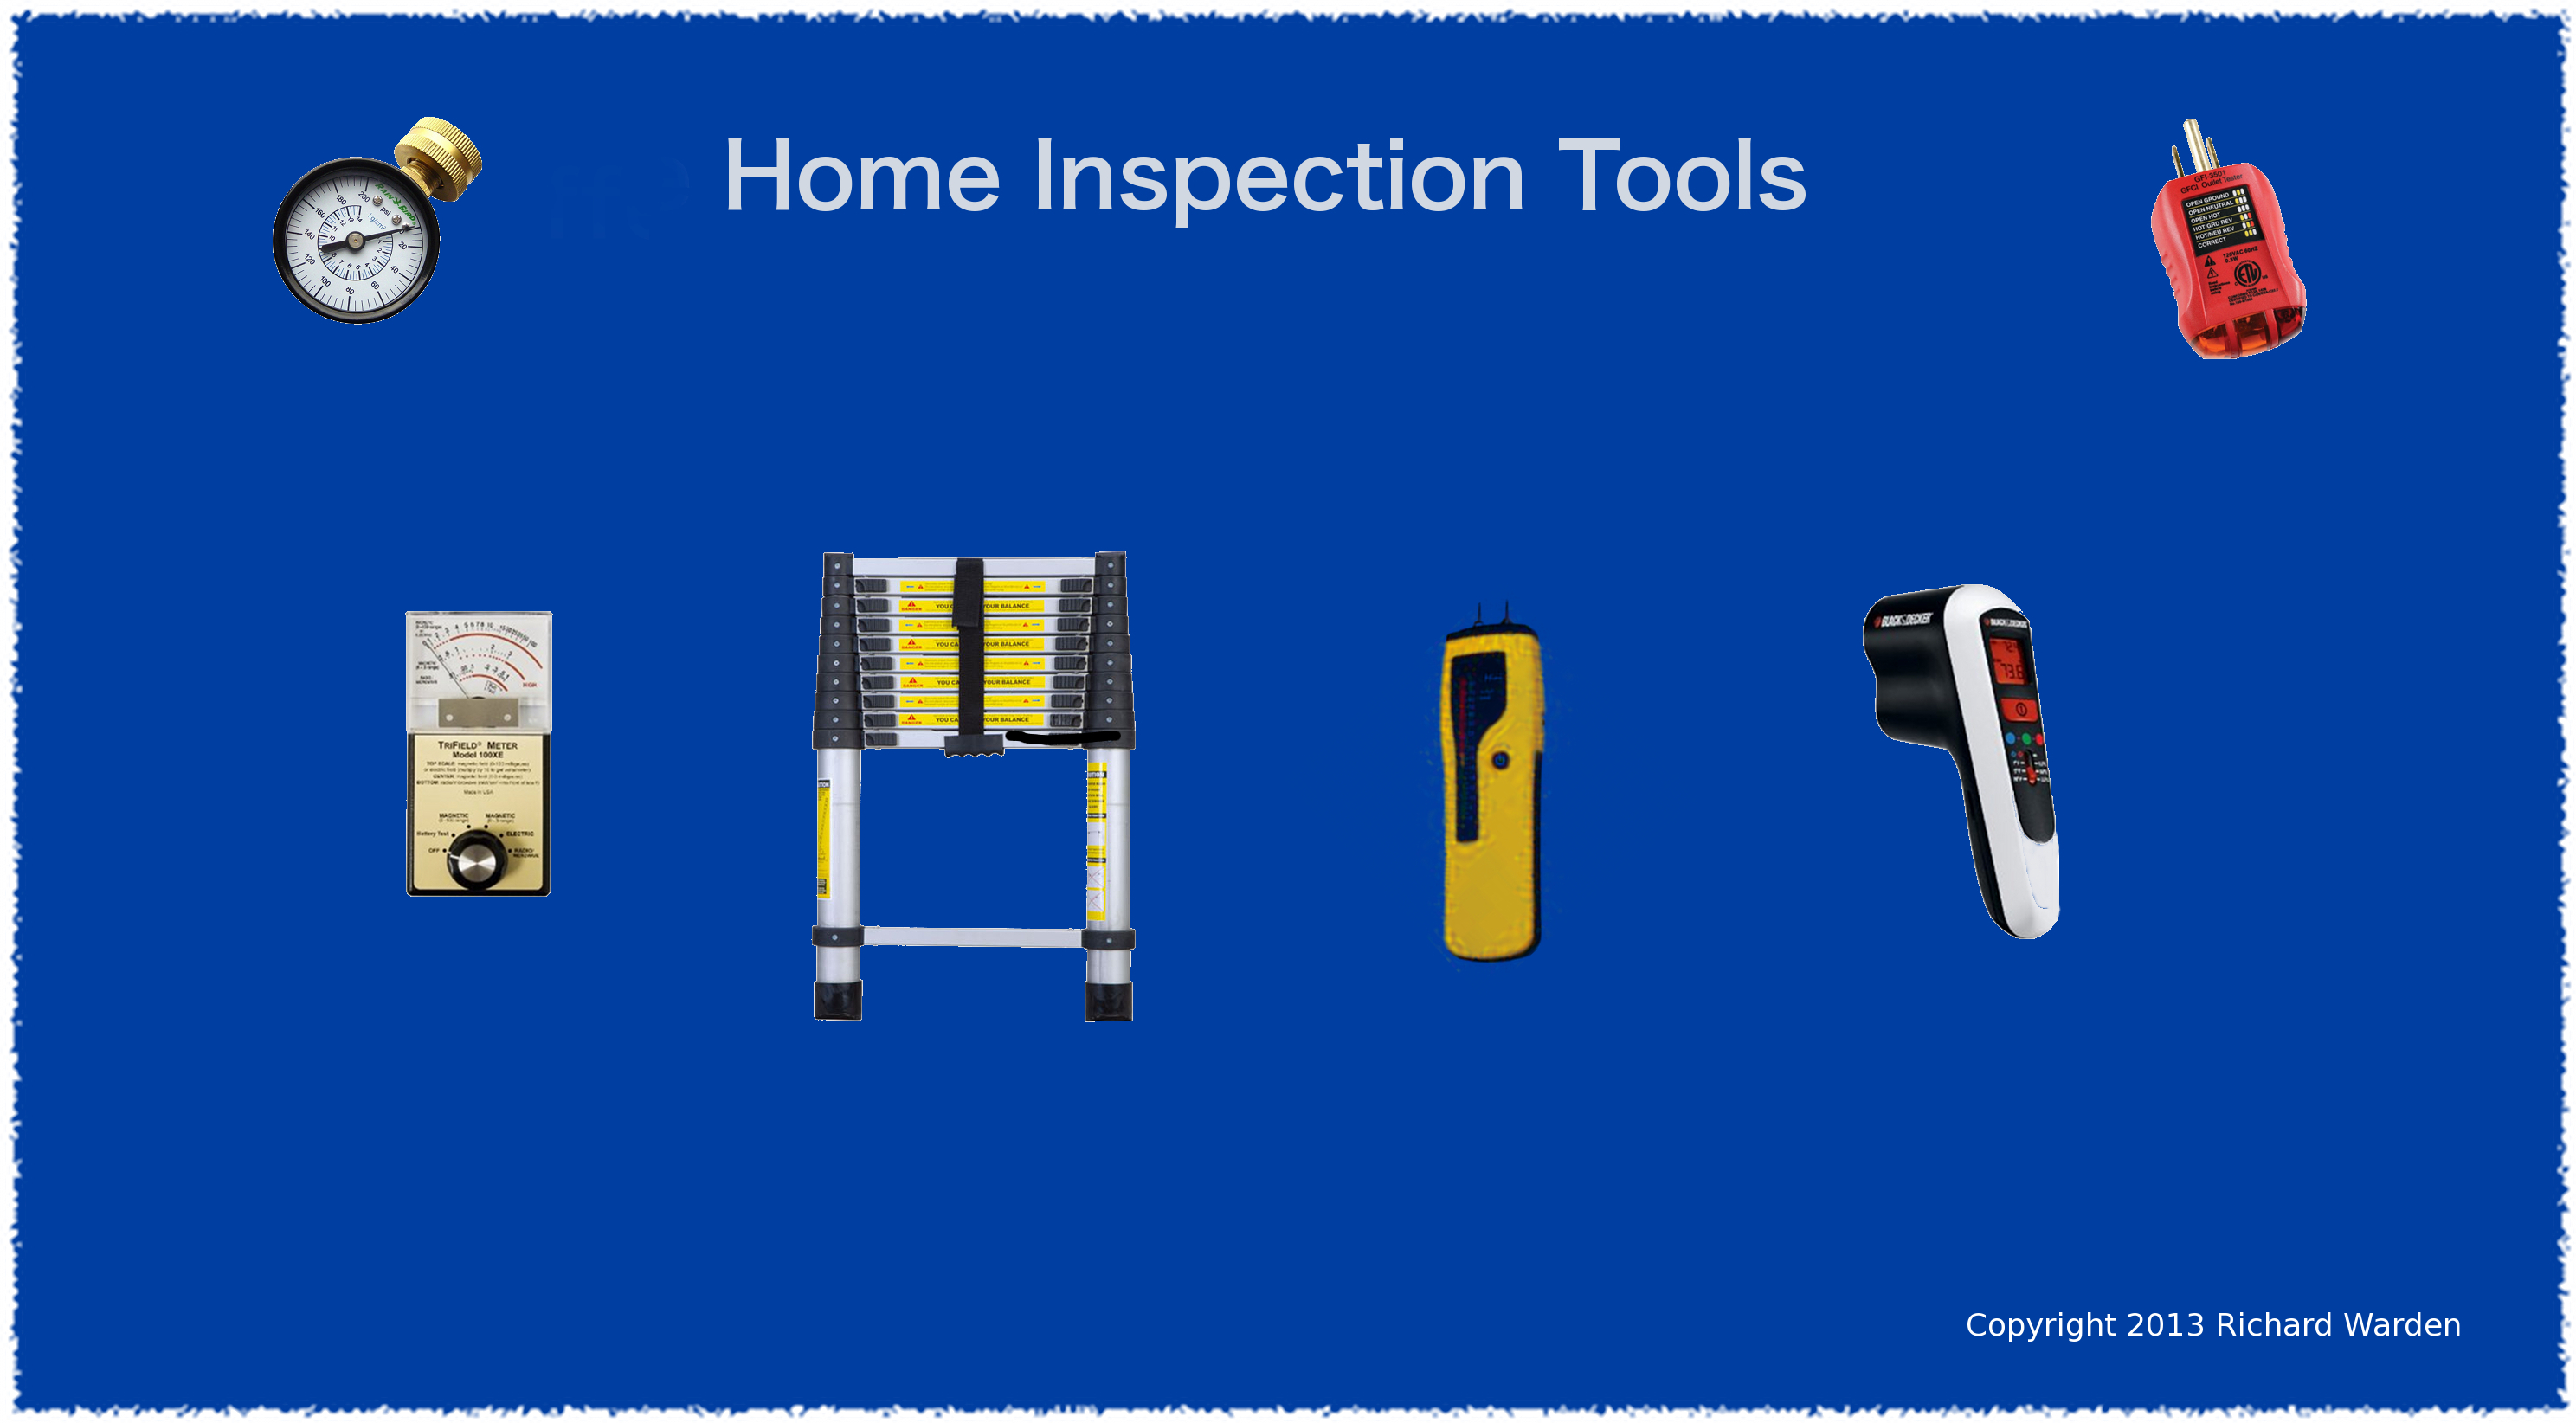 http://southoldhomeinspections.com/wp-content/uploads/2013/01/home-inspection-tools-for-movie-title-copyright.jpg